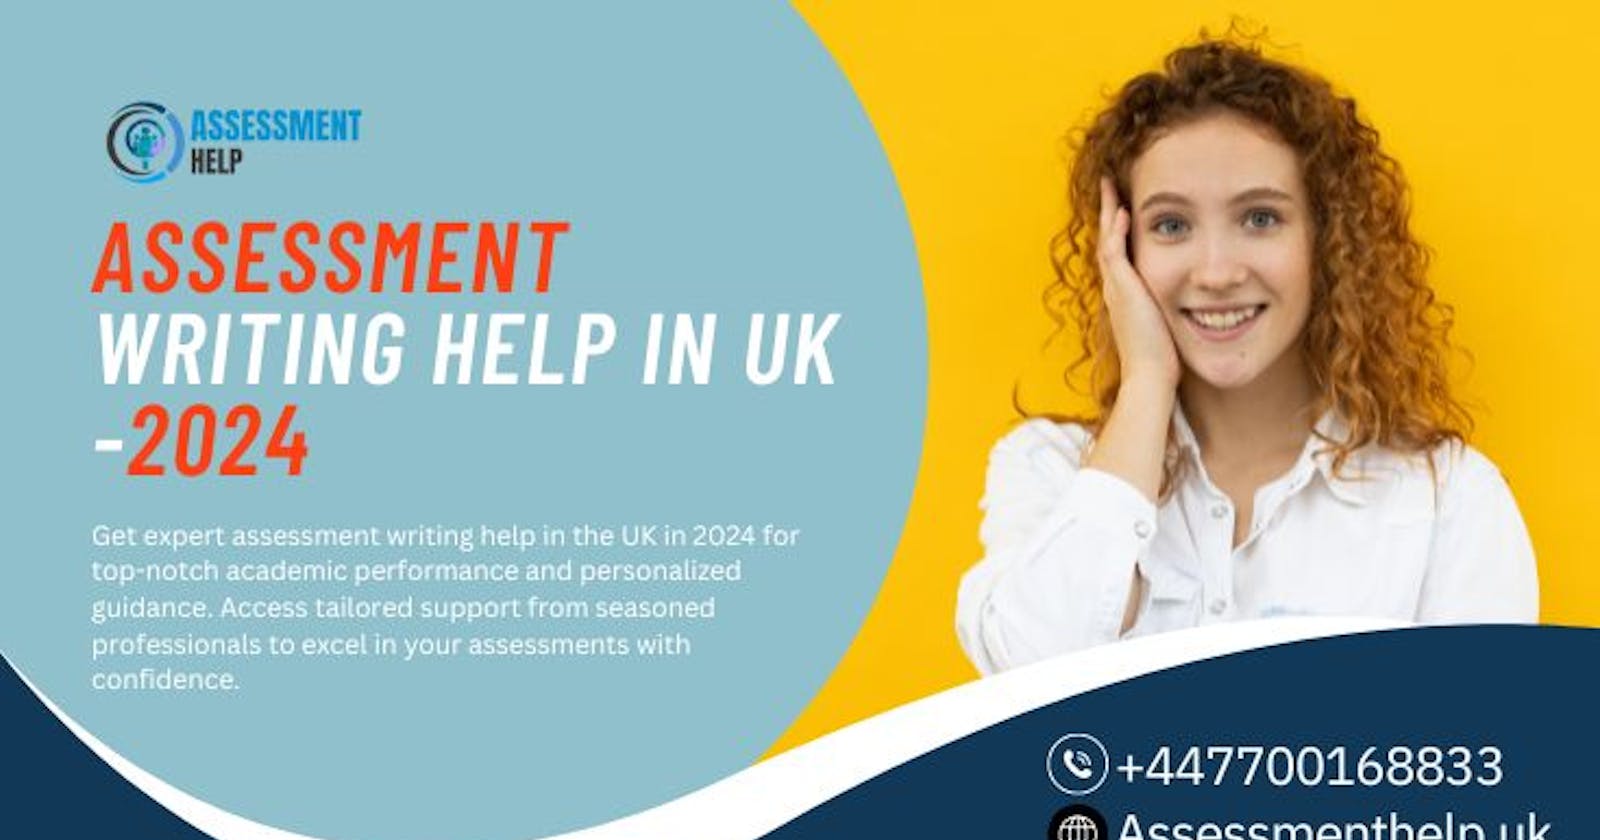 Make Your Academic Excellence Easy with Assessment Help - 2024